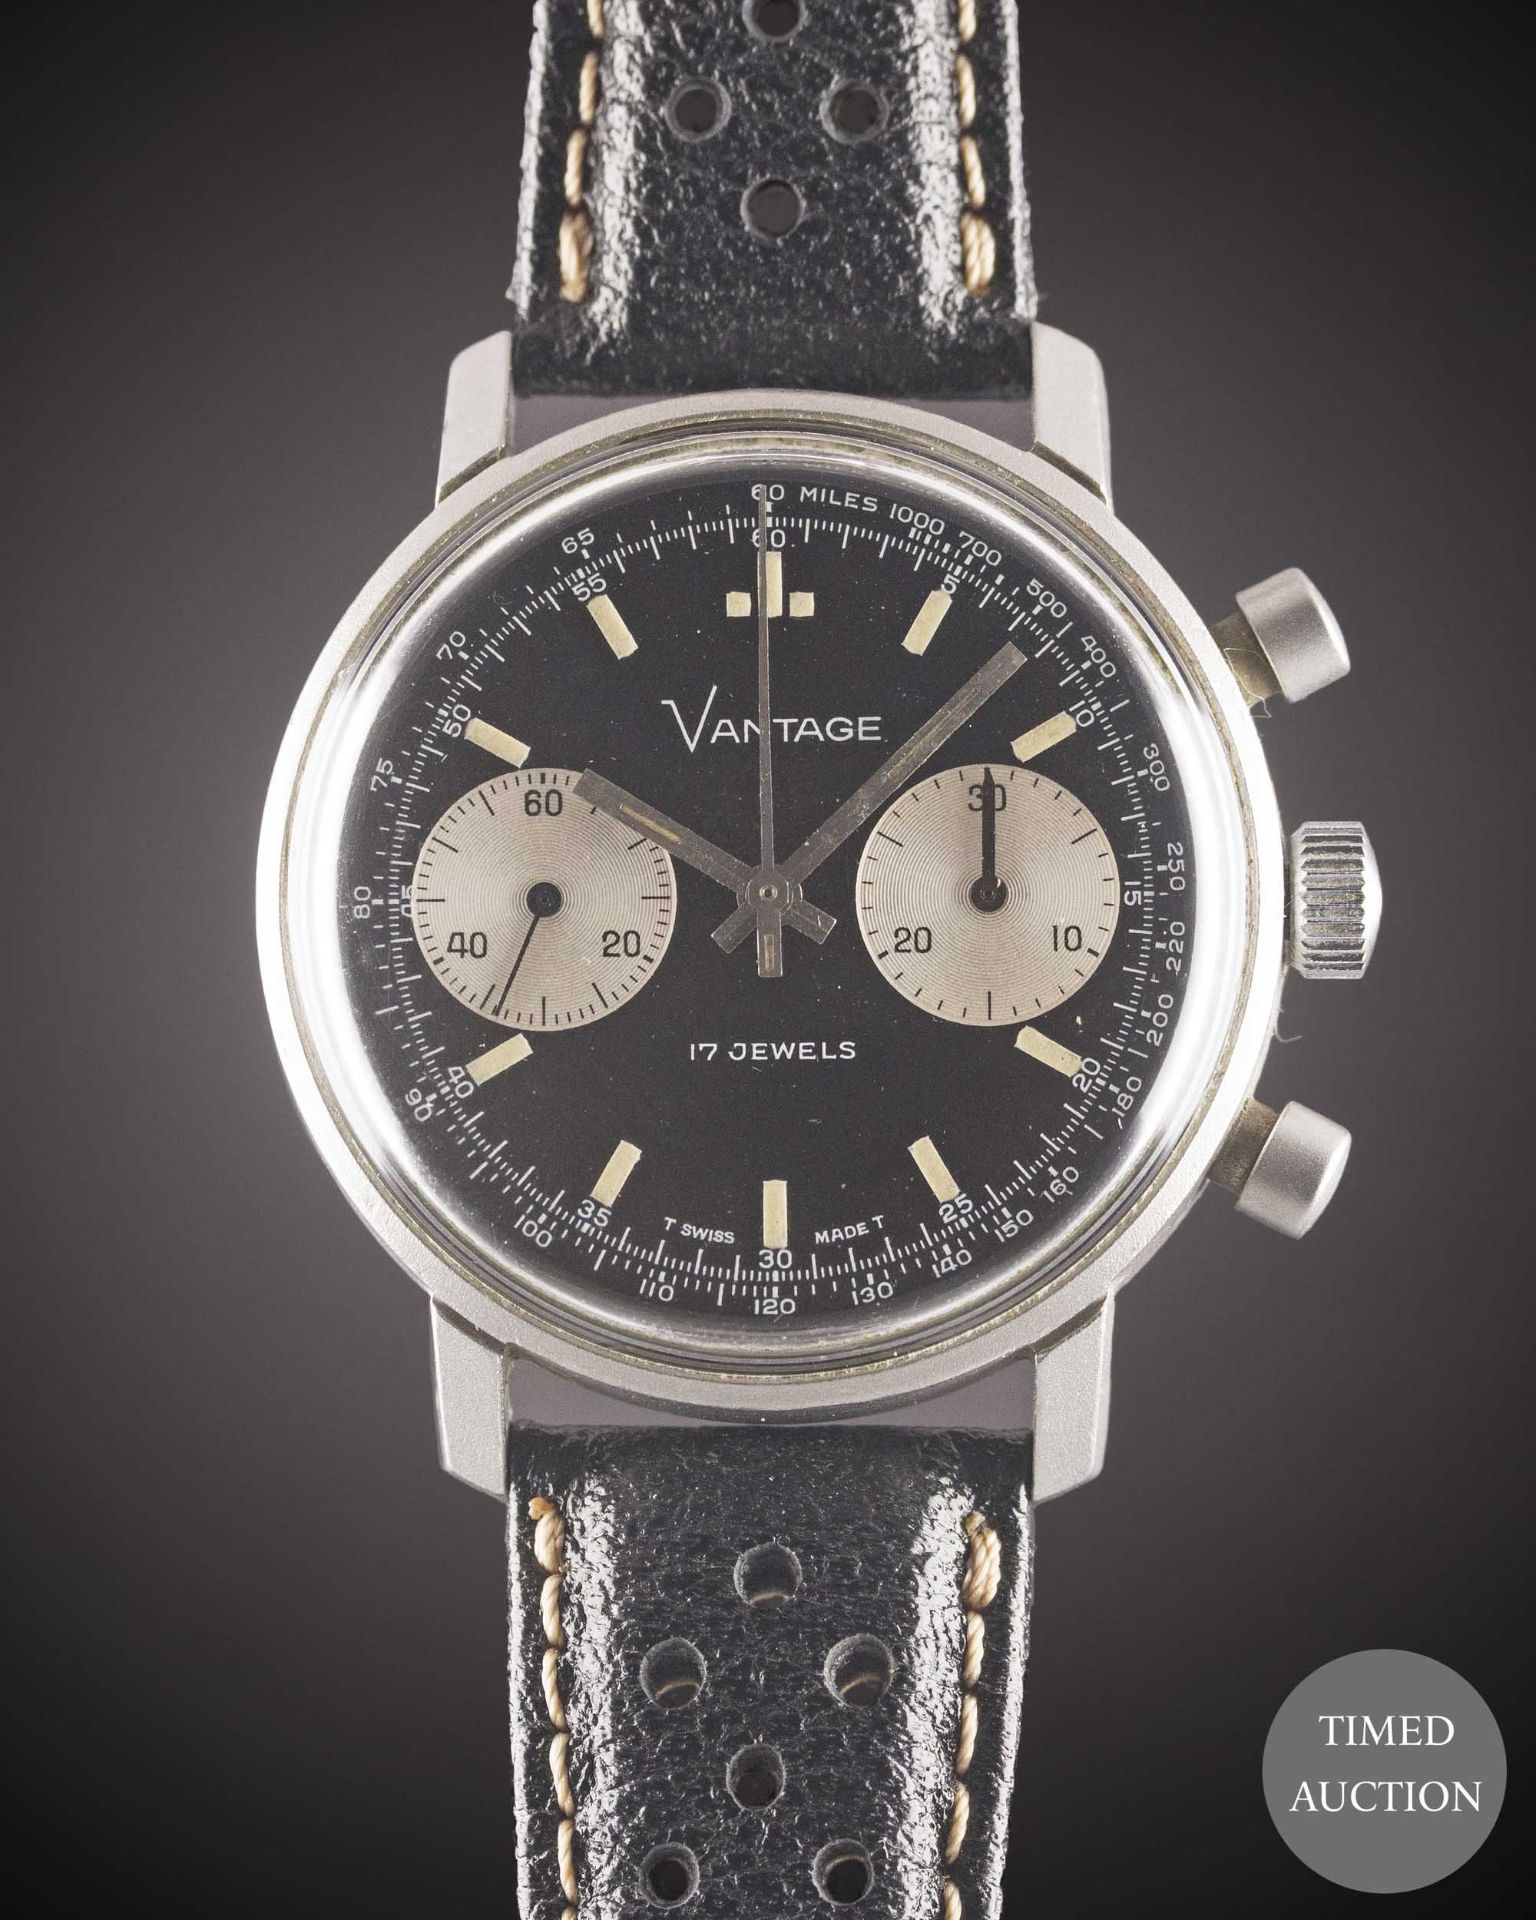 A GENTLEMAN'S STAINLESS STEEL VANTAGE CHRONOGRAPH WRIST WATCH CIRCA 1970, WITH GLOSS BLACK DIAL